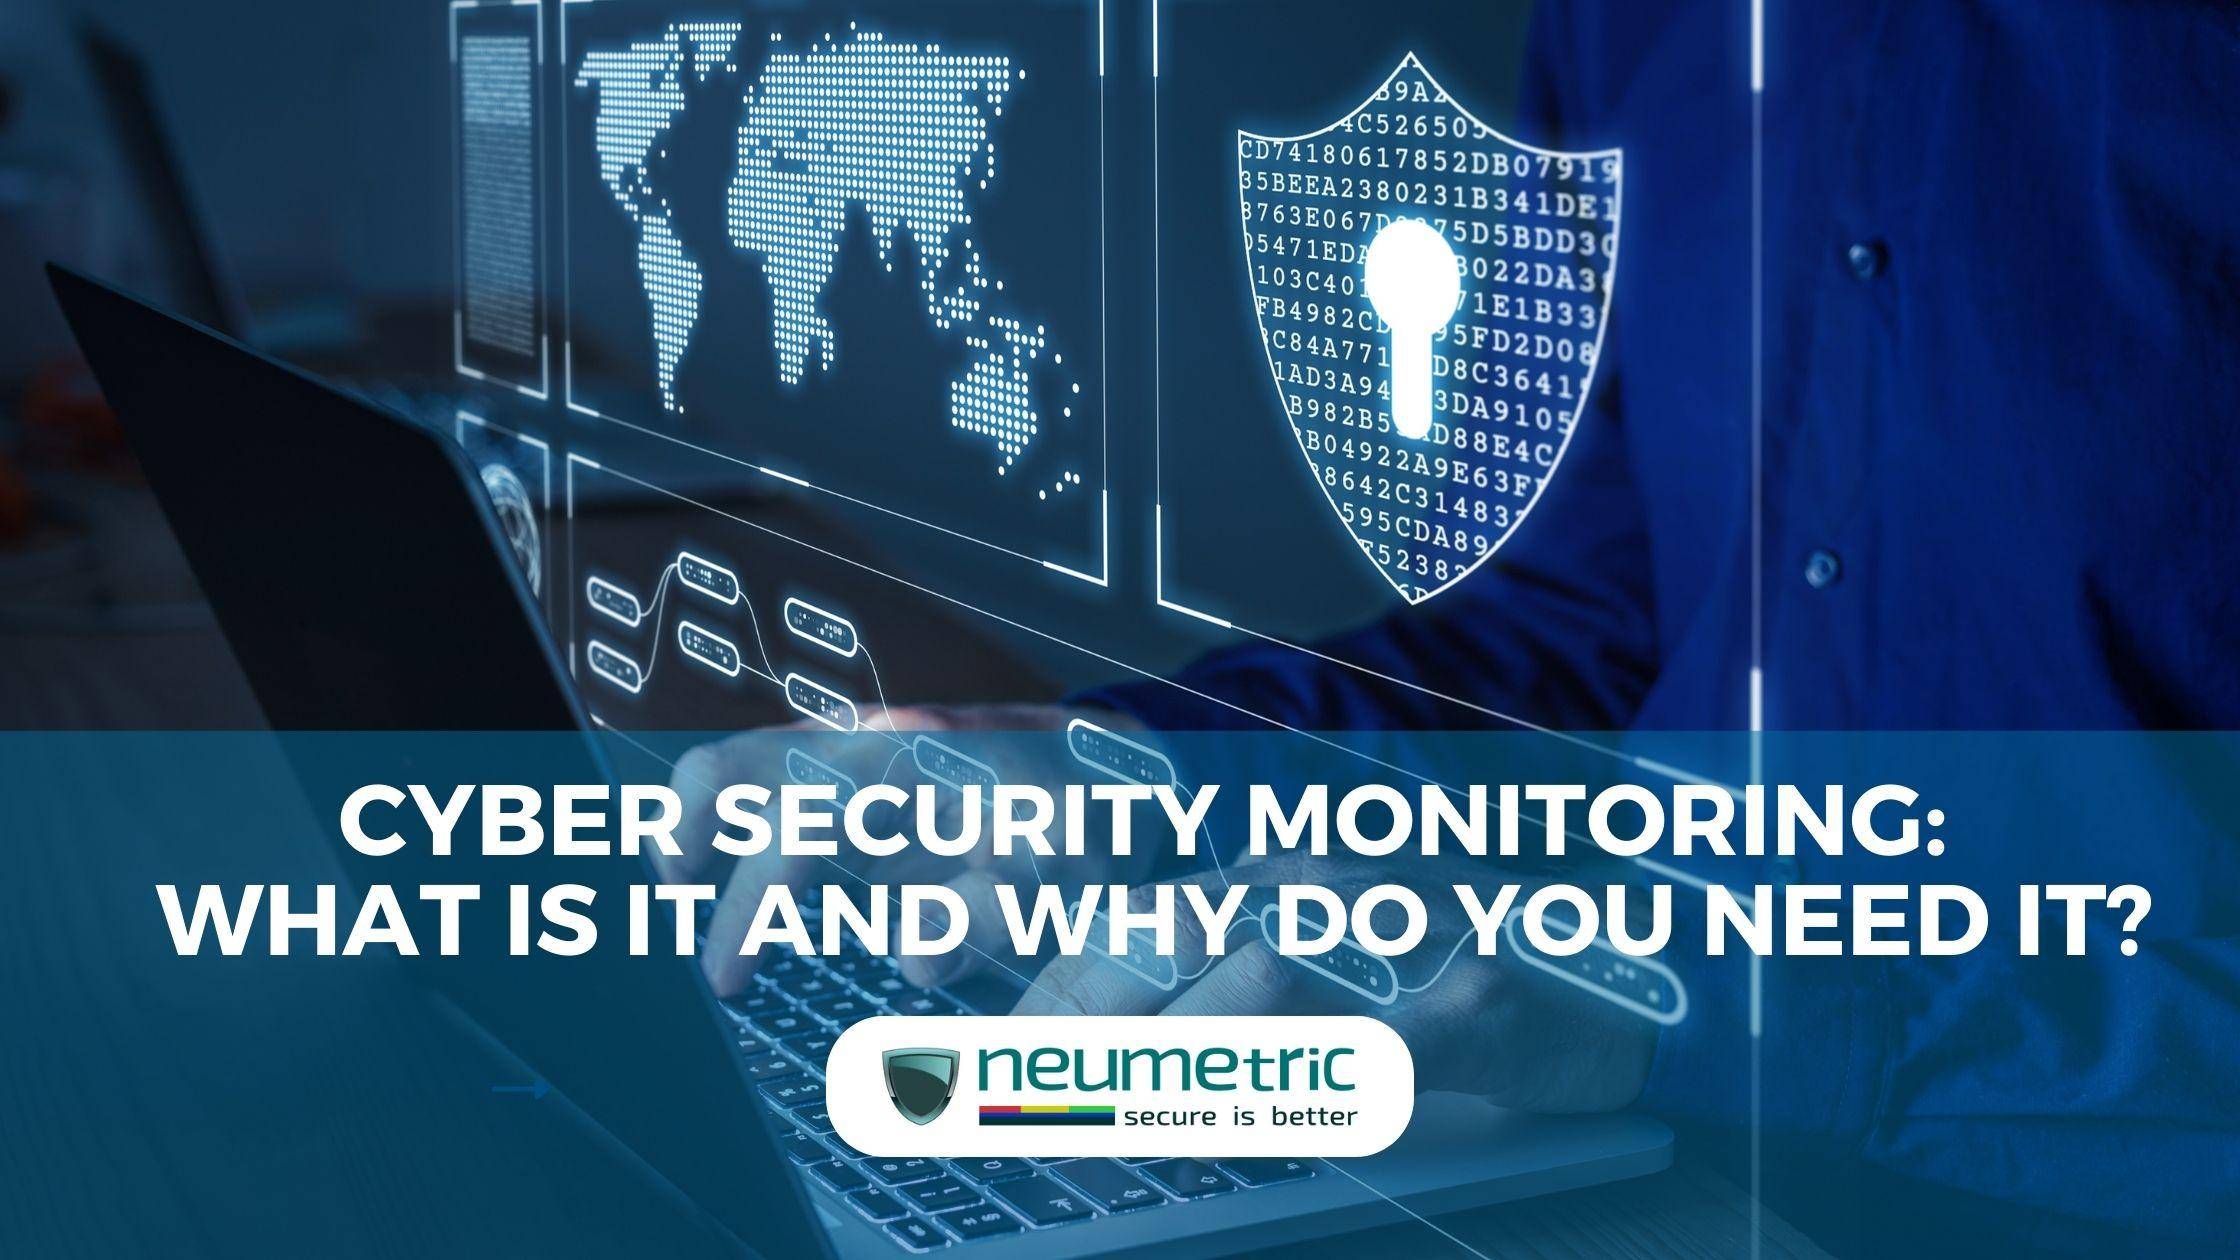 Cyber Security Monitoring: What Is It And Why Do You Need It?